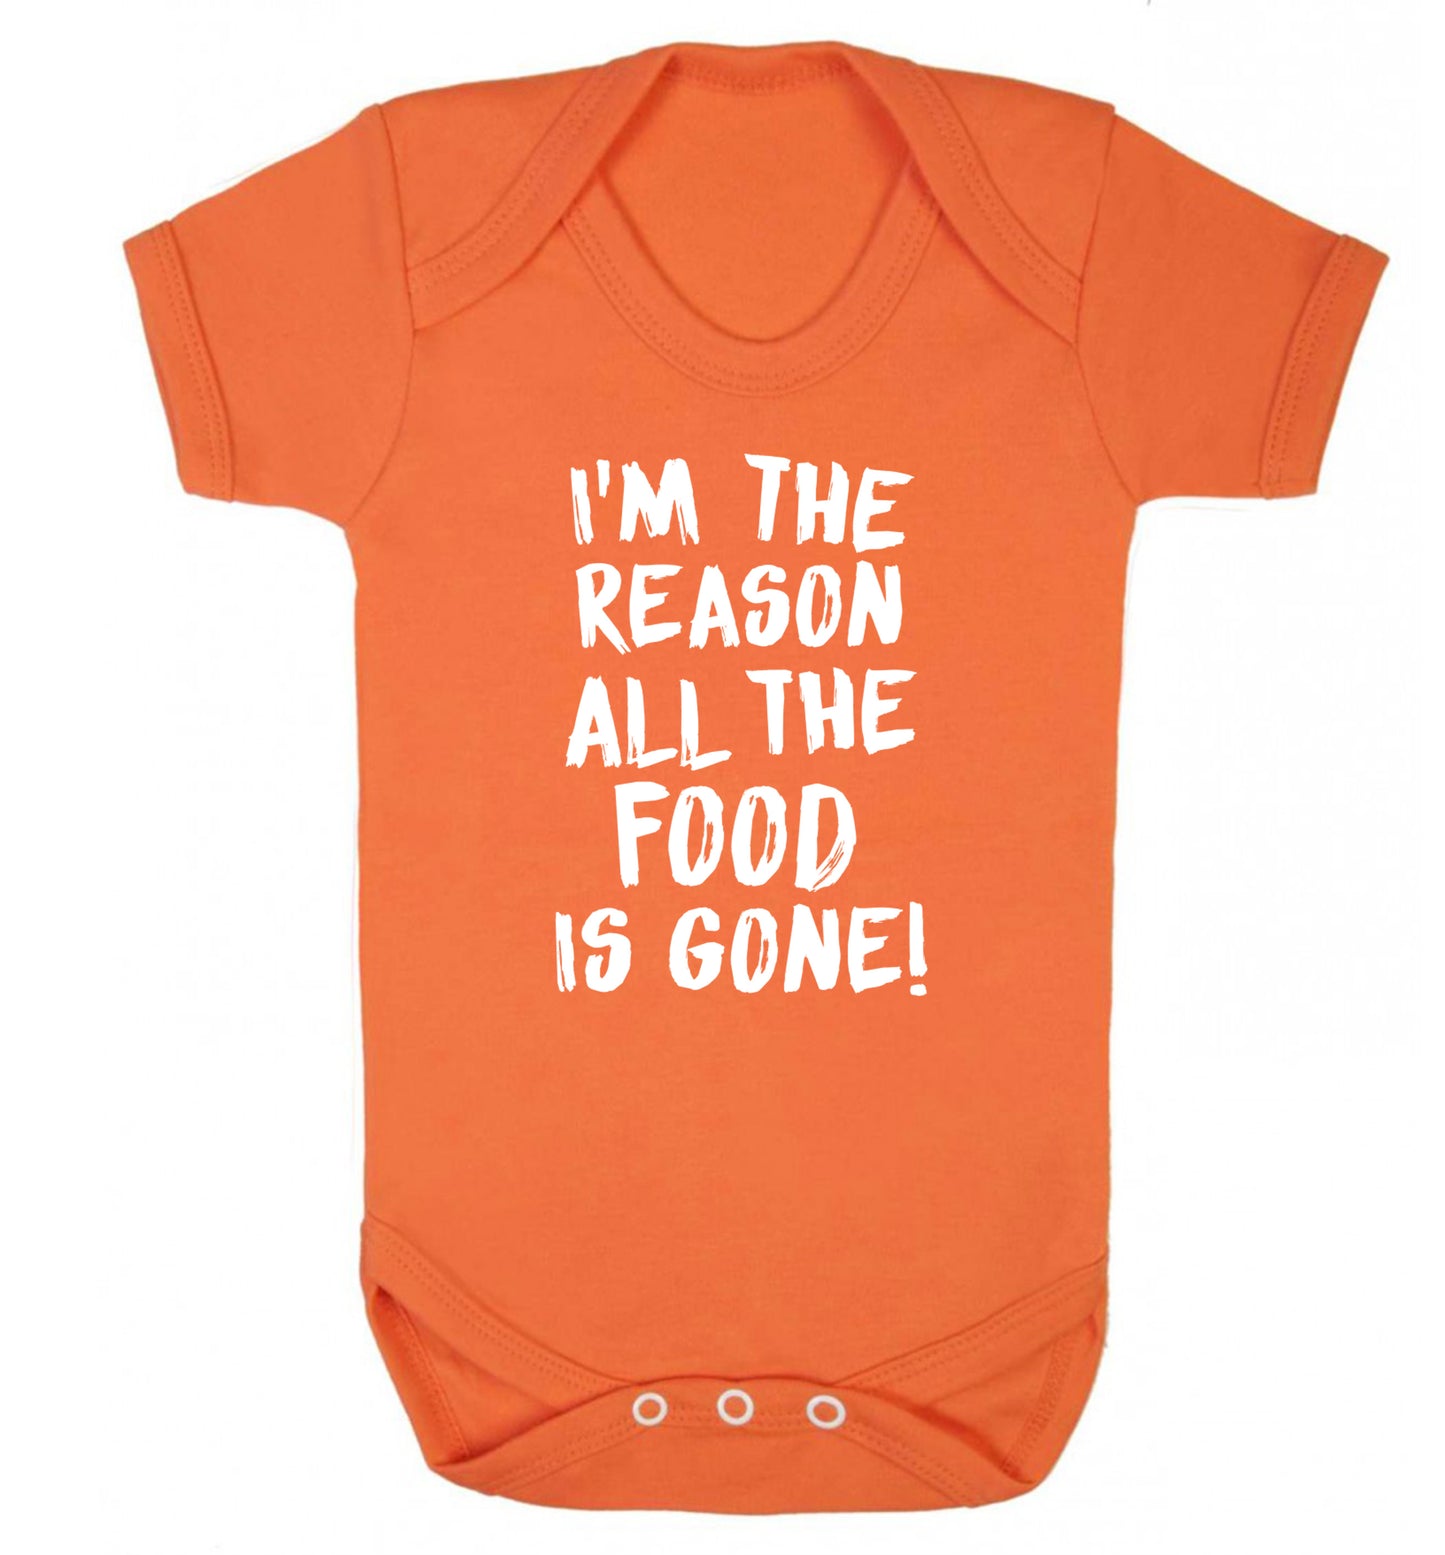 I'm the reason why all the food is gone Baby Vest orange 18-24 months